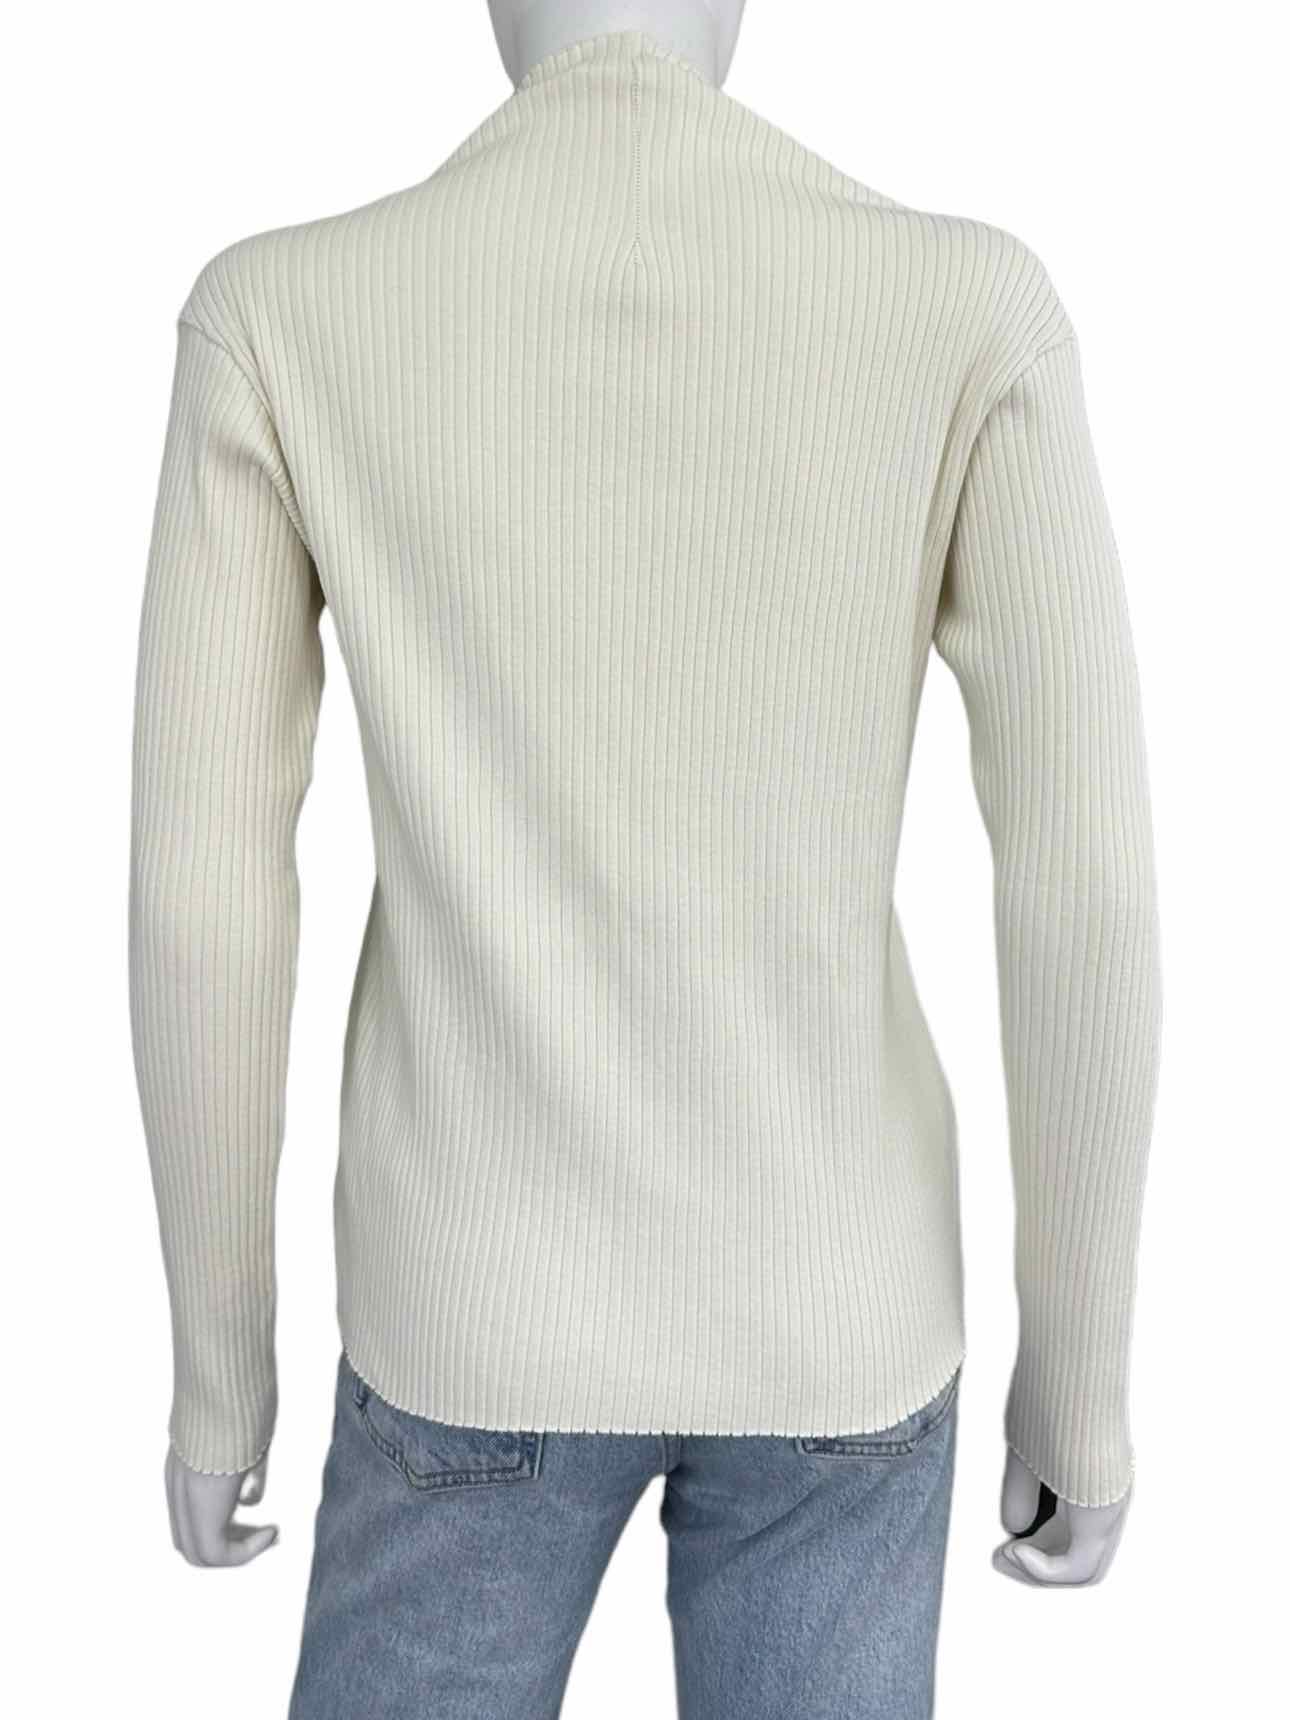 STATESIDE Cream Ribbed Knit Mock Neck Top Size S